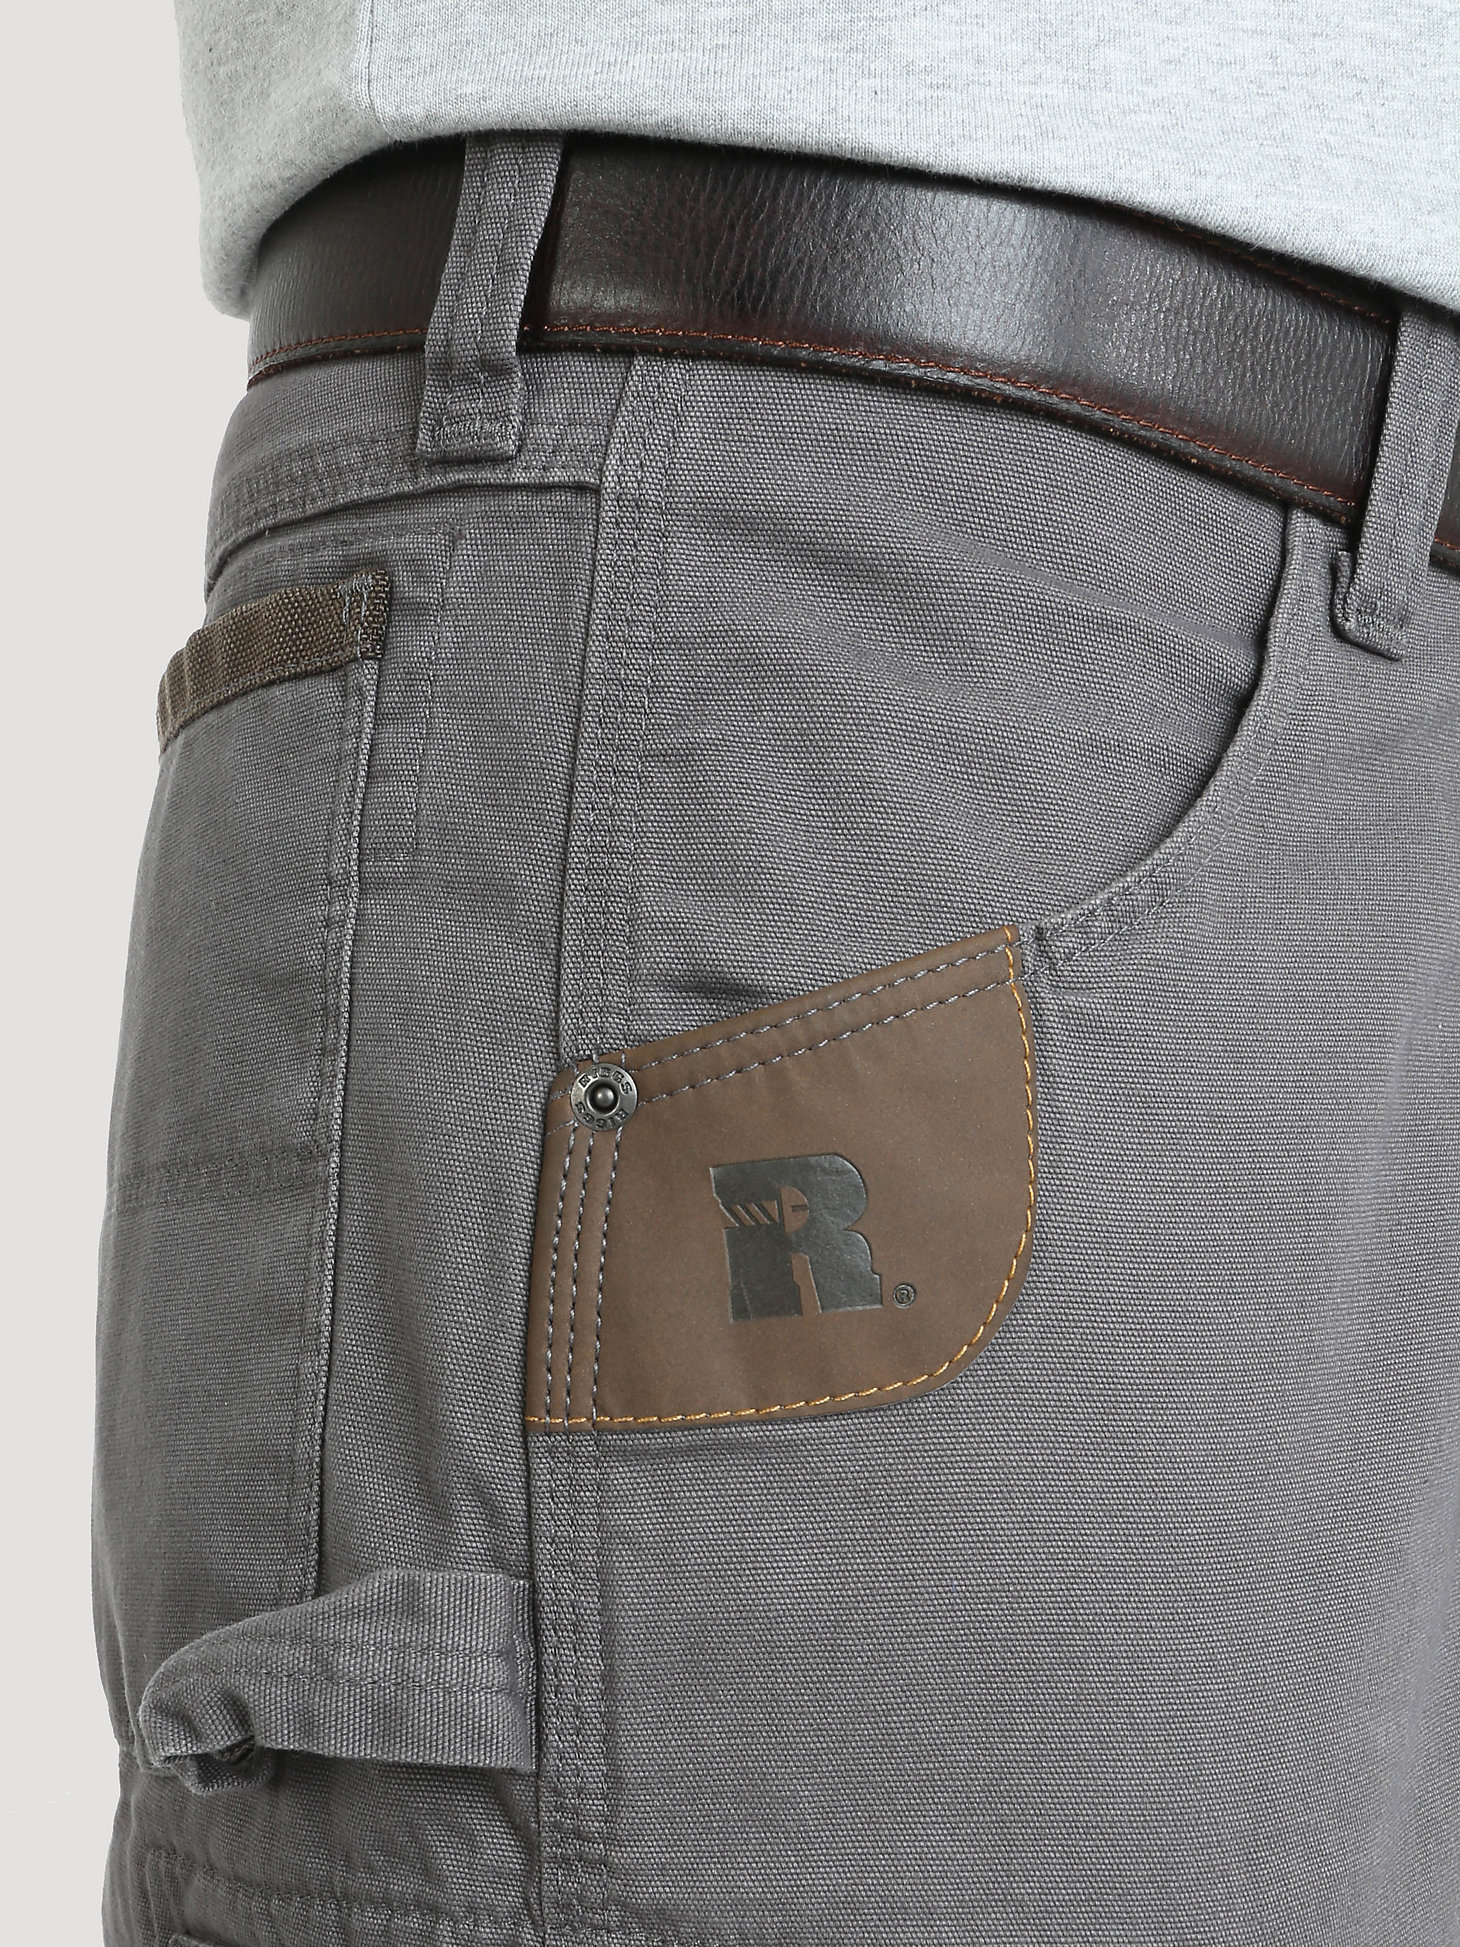 Wrangler® RIGGS Workwear® Advanced Comfort Lightweight Ranger Pant in Charcoal alternative view 6